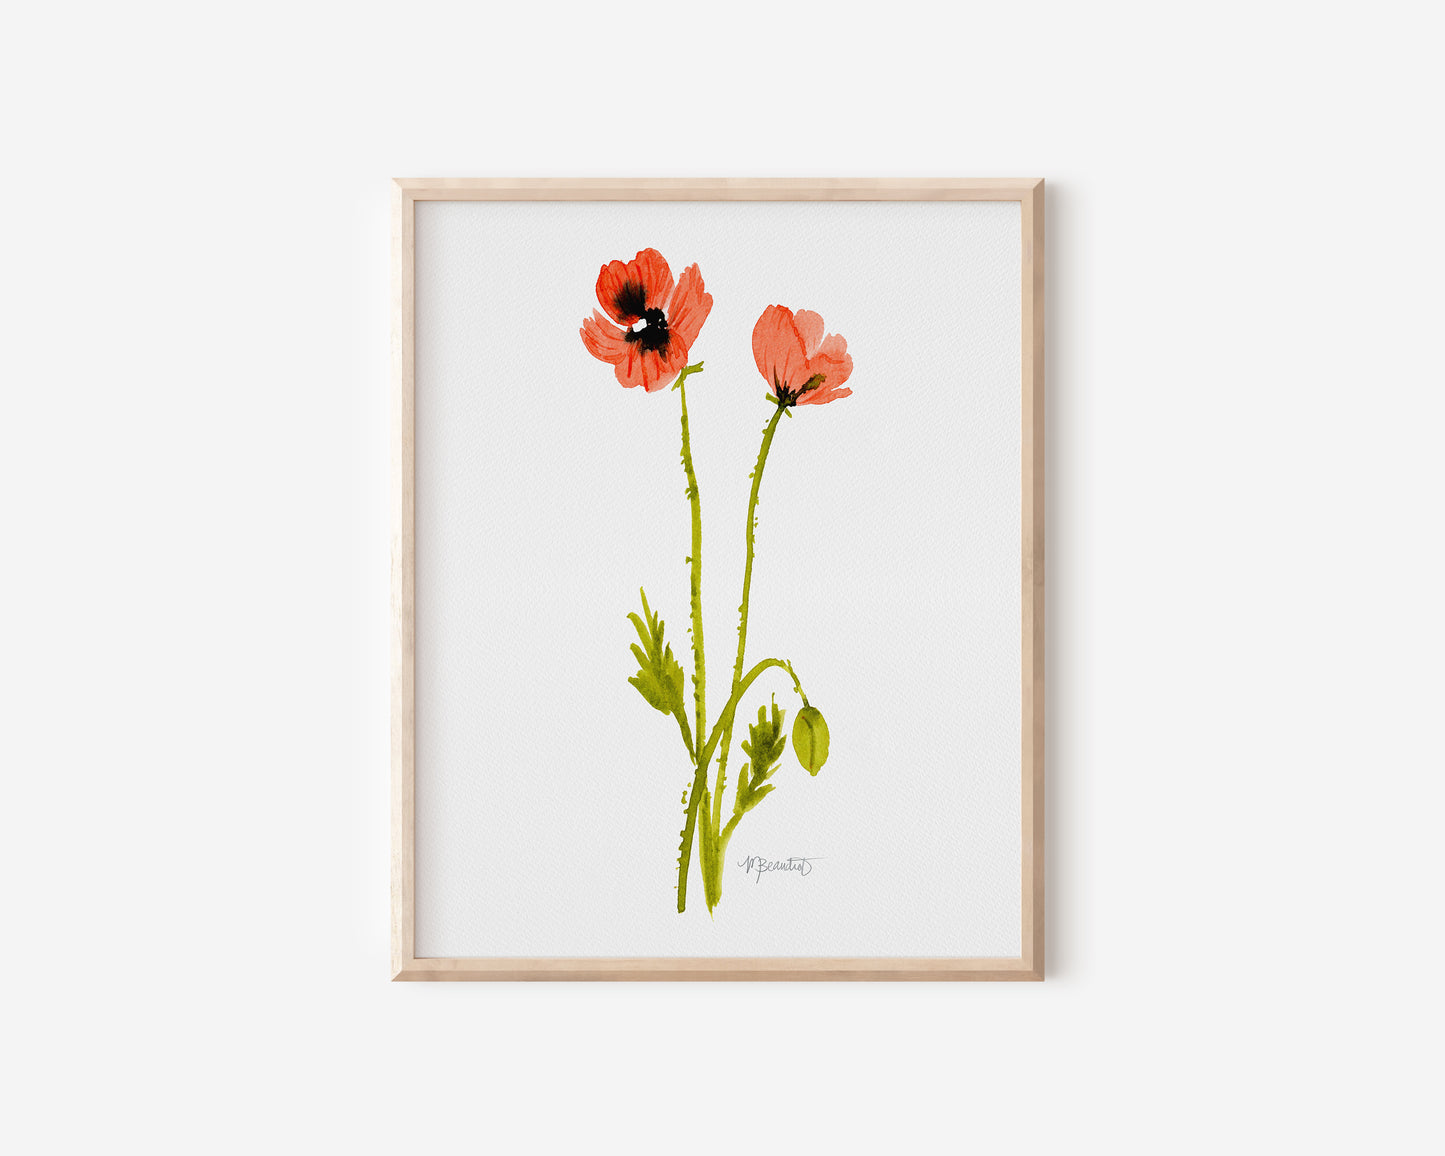 Loose Poppy Bouquet with Dancing Stem No. 1: Set of 2 Prints